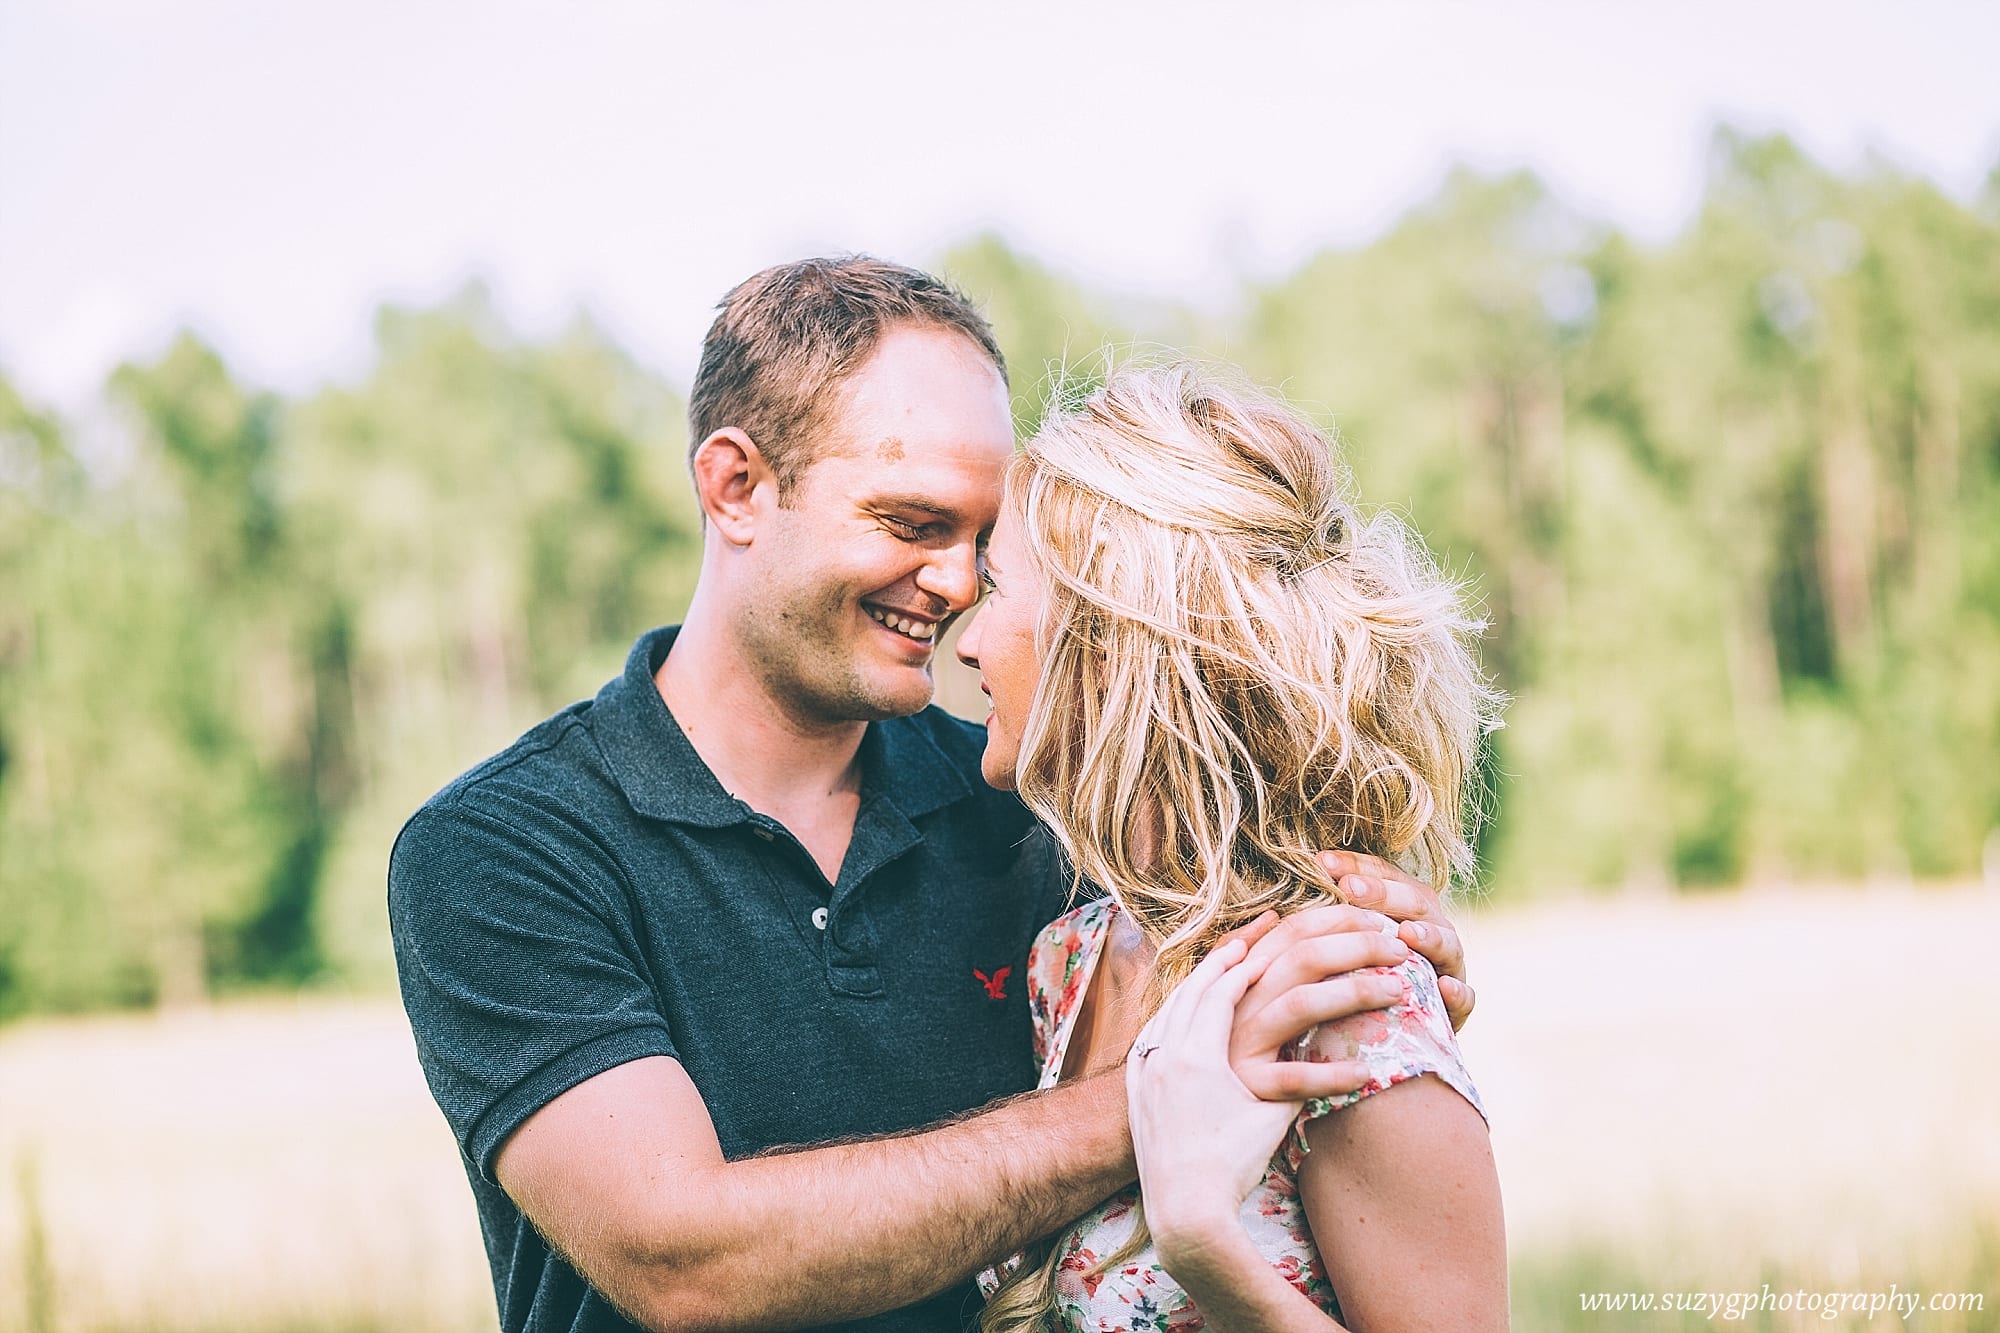 engagements-new orleans-texas-baton rouge-lake charles-suzy g-photography-suzygphotography_0012